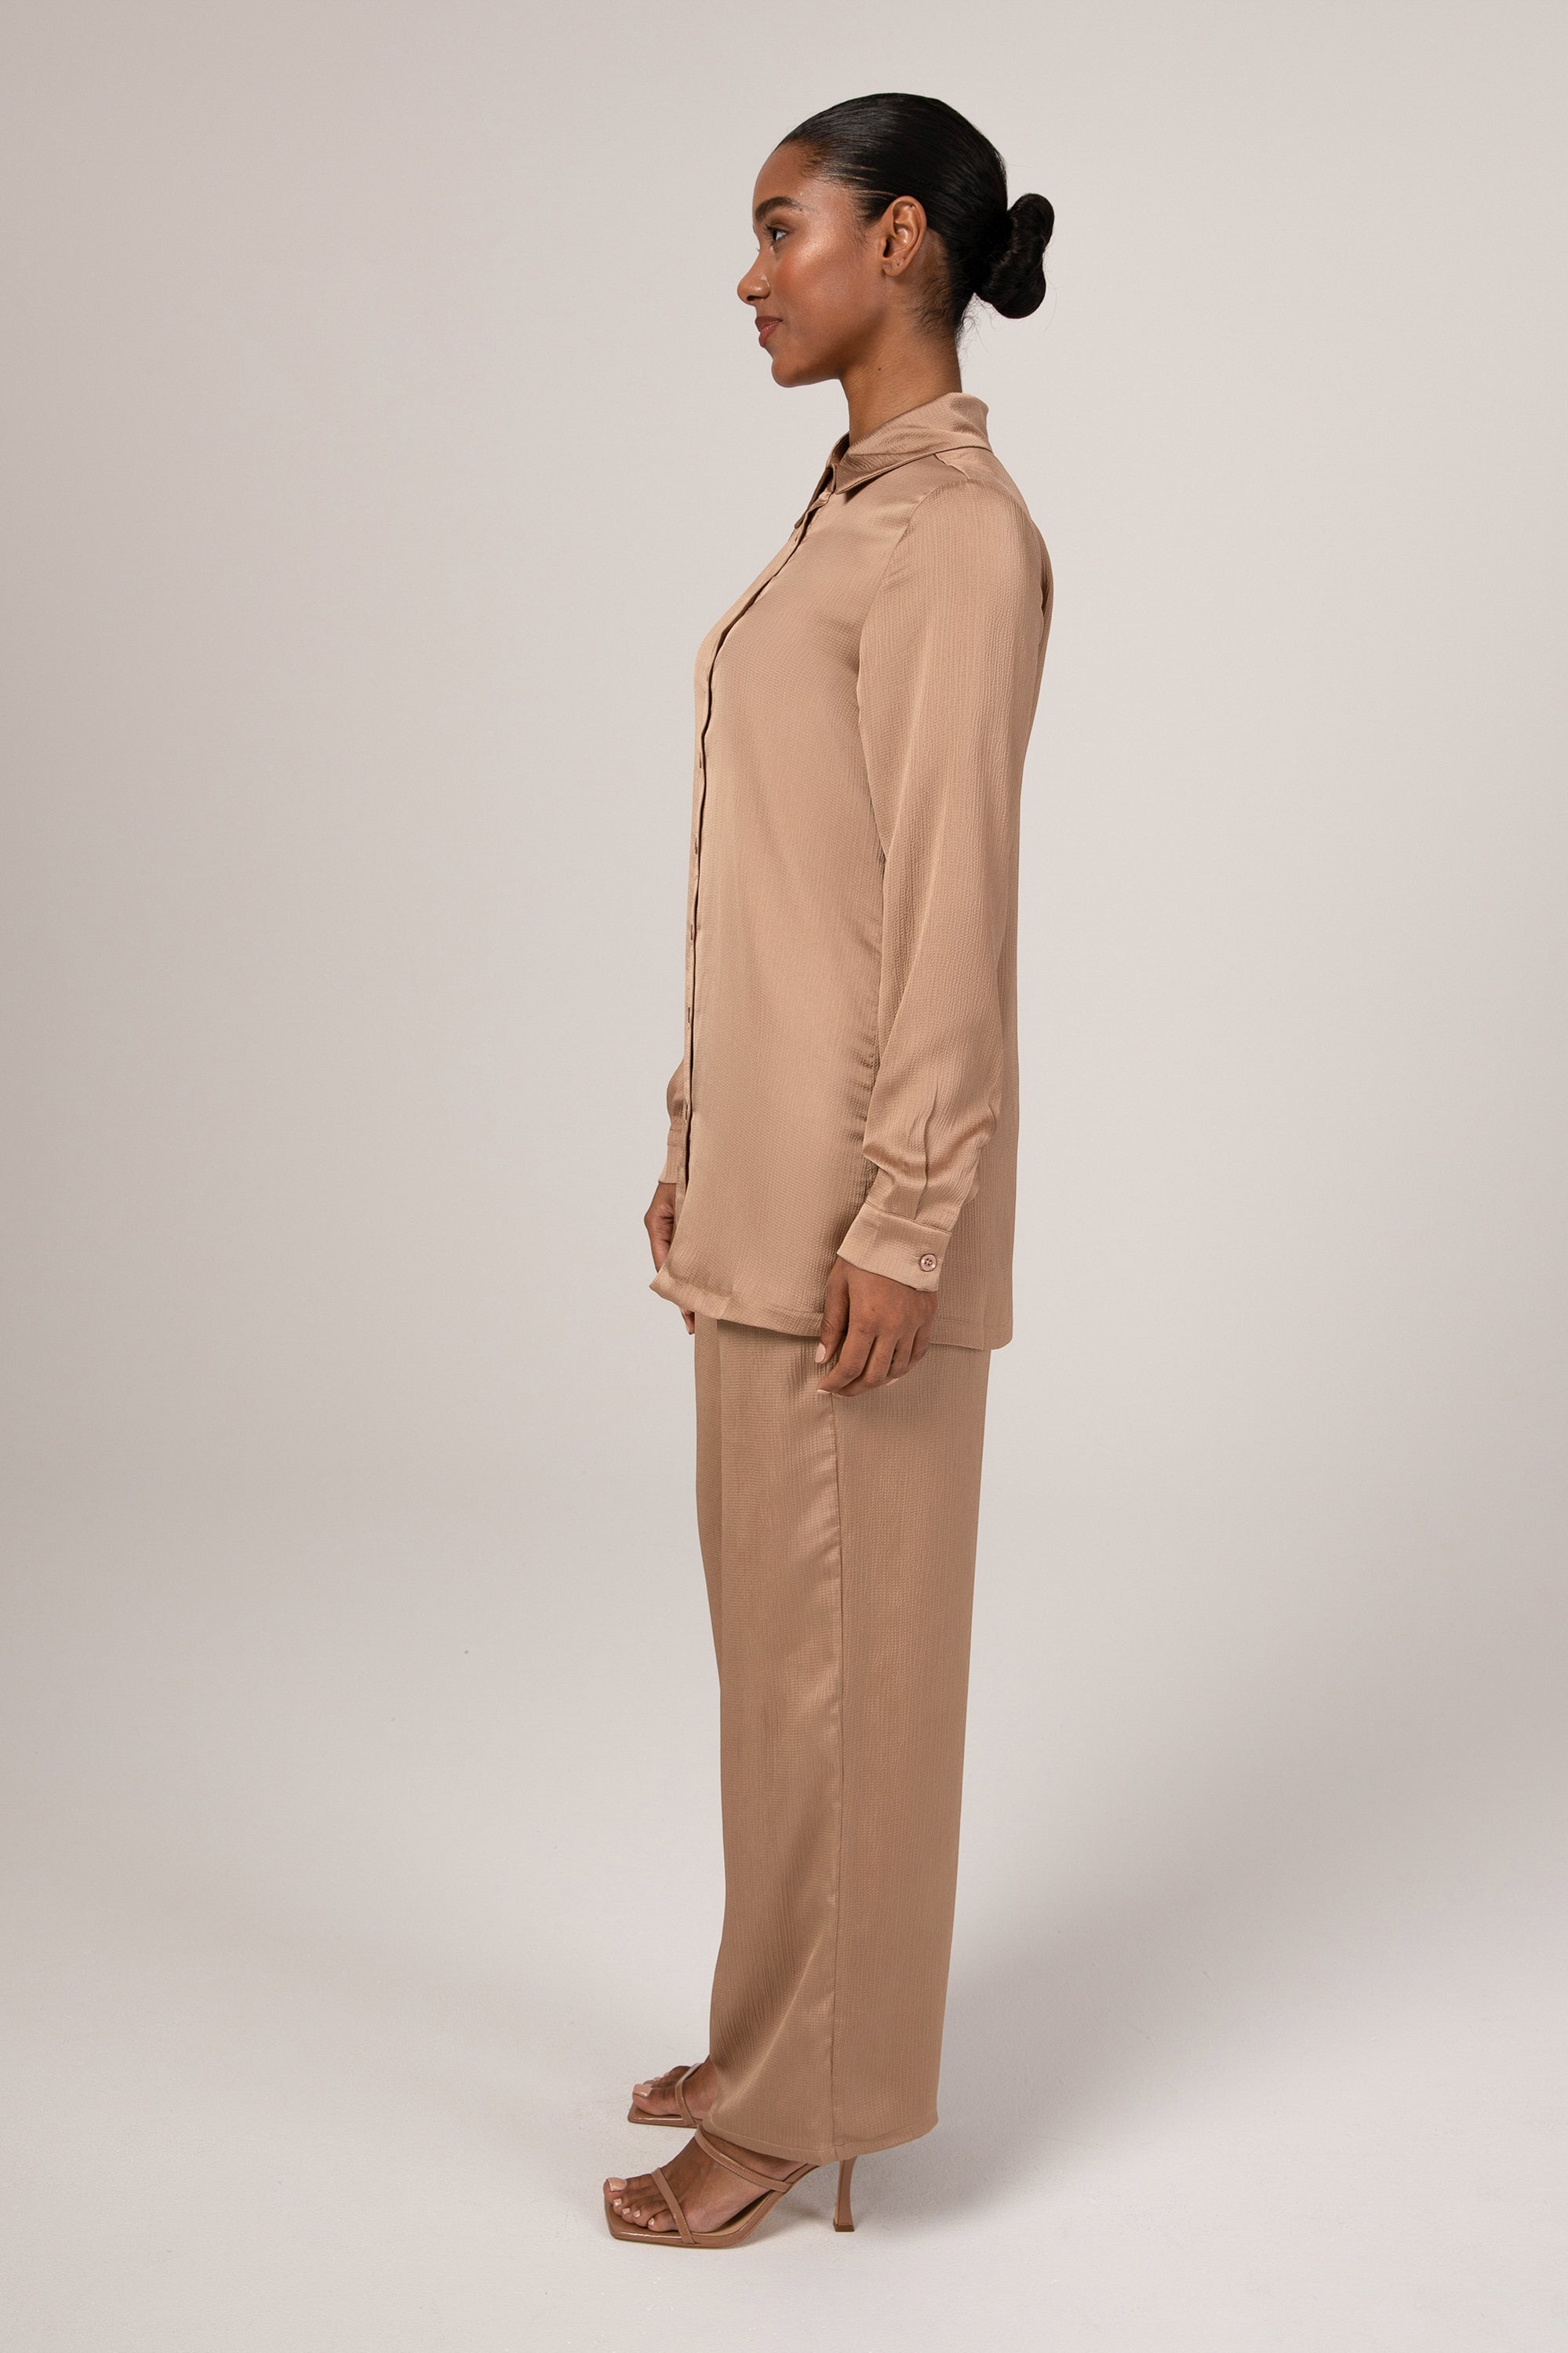 Katia Textured Button Down Top - Latte Veiled Collection 